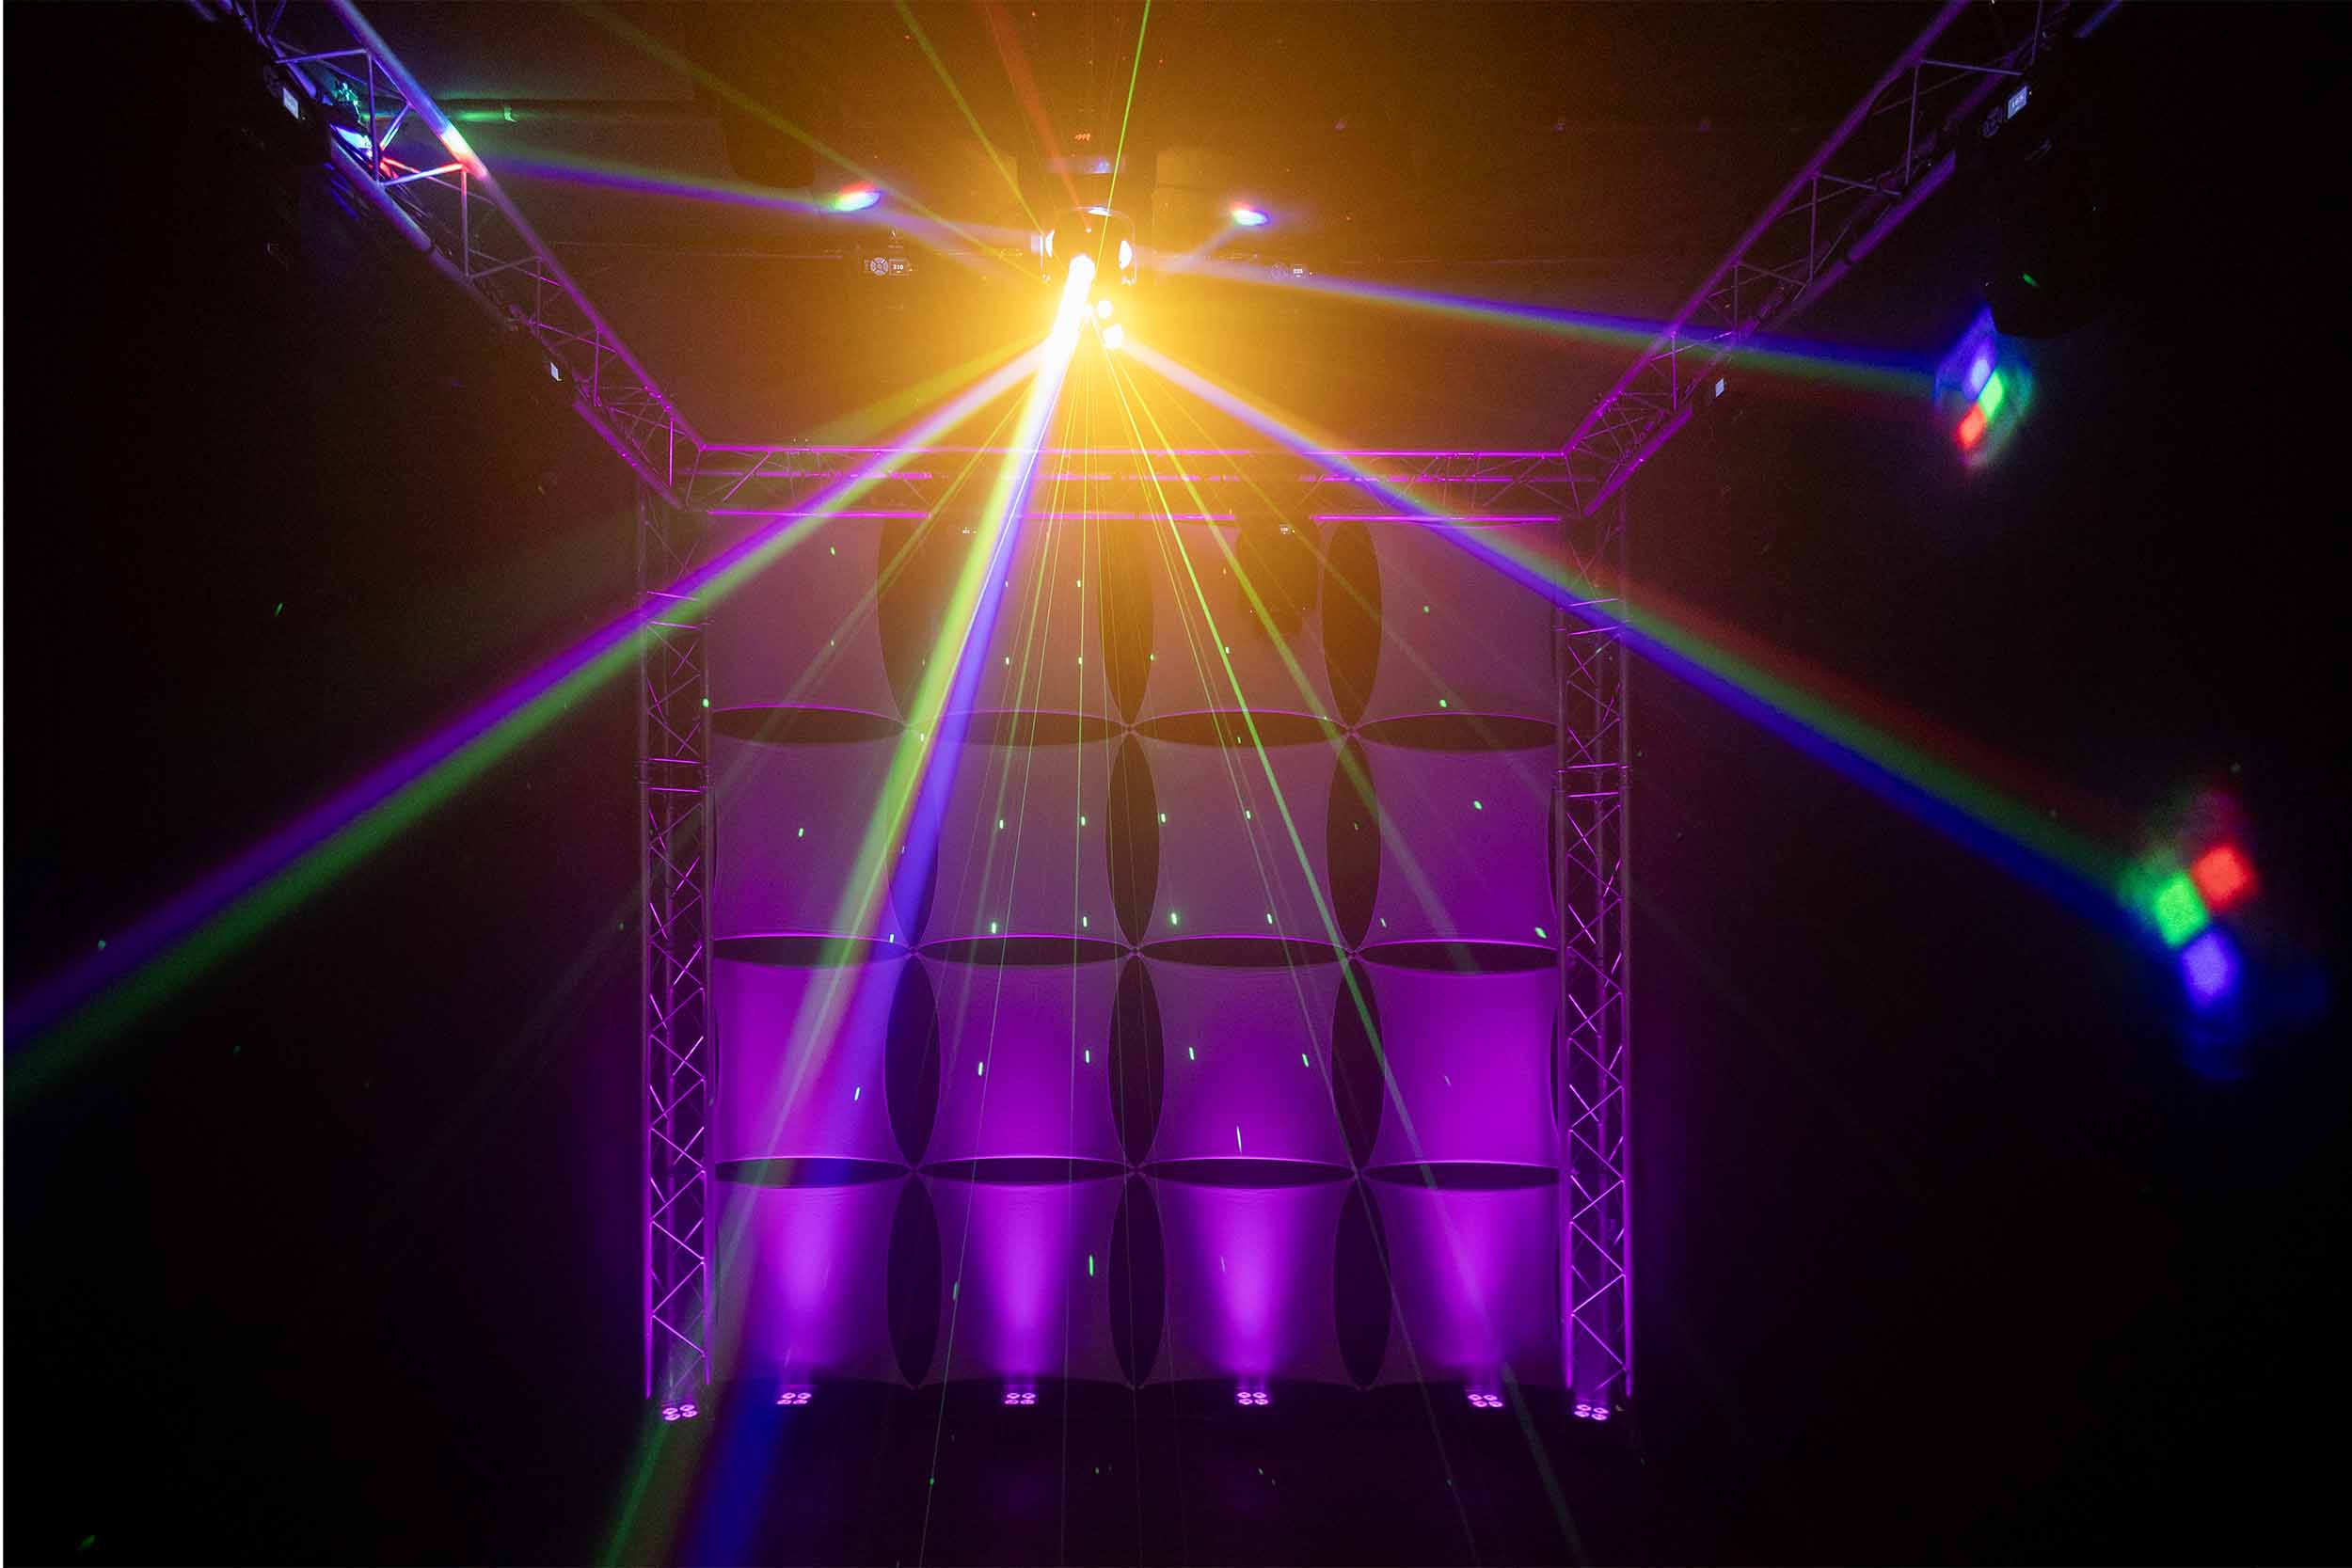 Colorkey CKU-1072, FX Multi-Effect Moving Head with Multicolor LED Beams and Lasers ColorKey